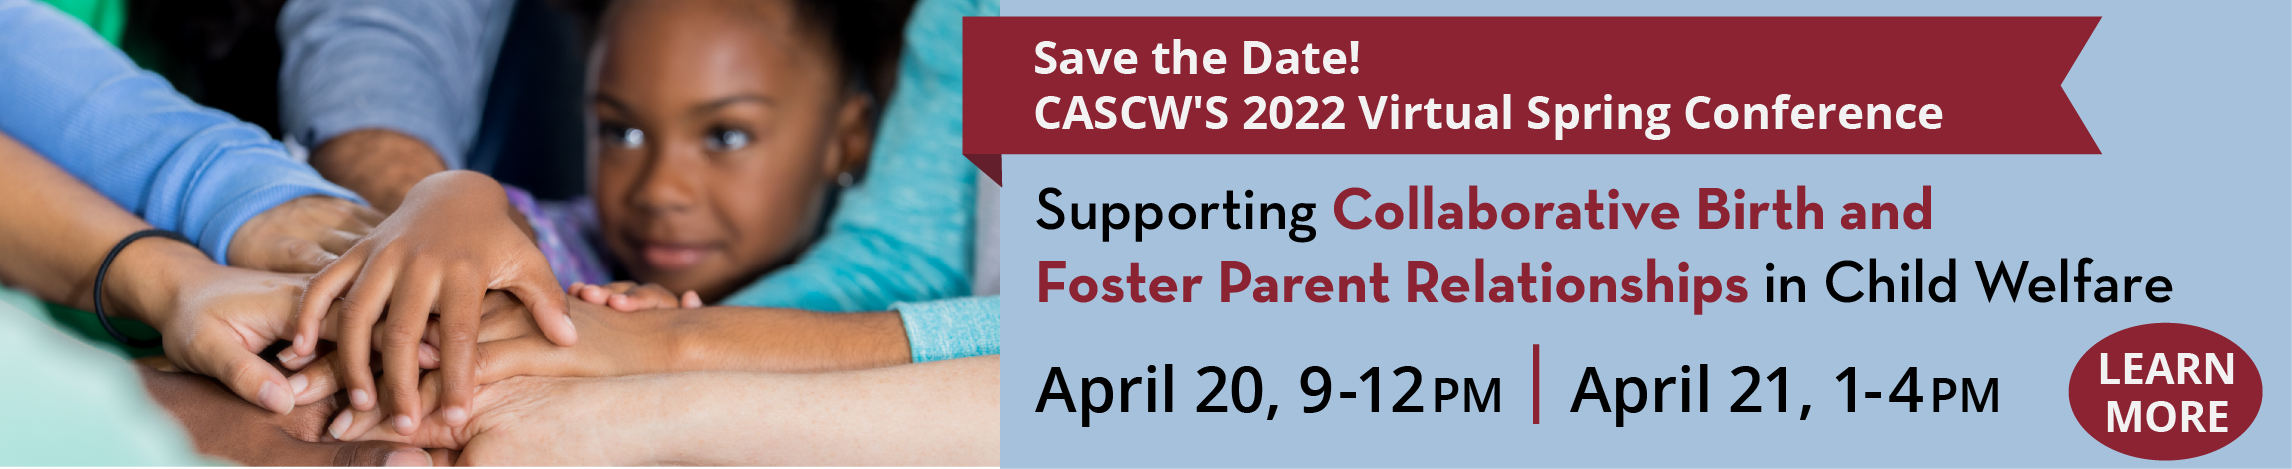 CASCW 2022 Conference Banner